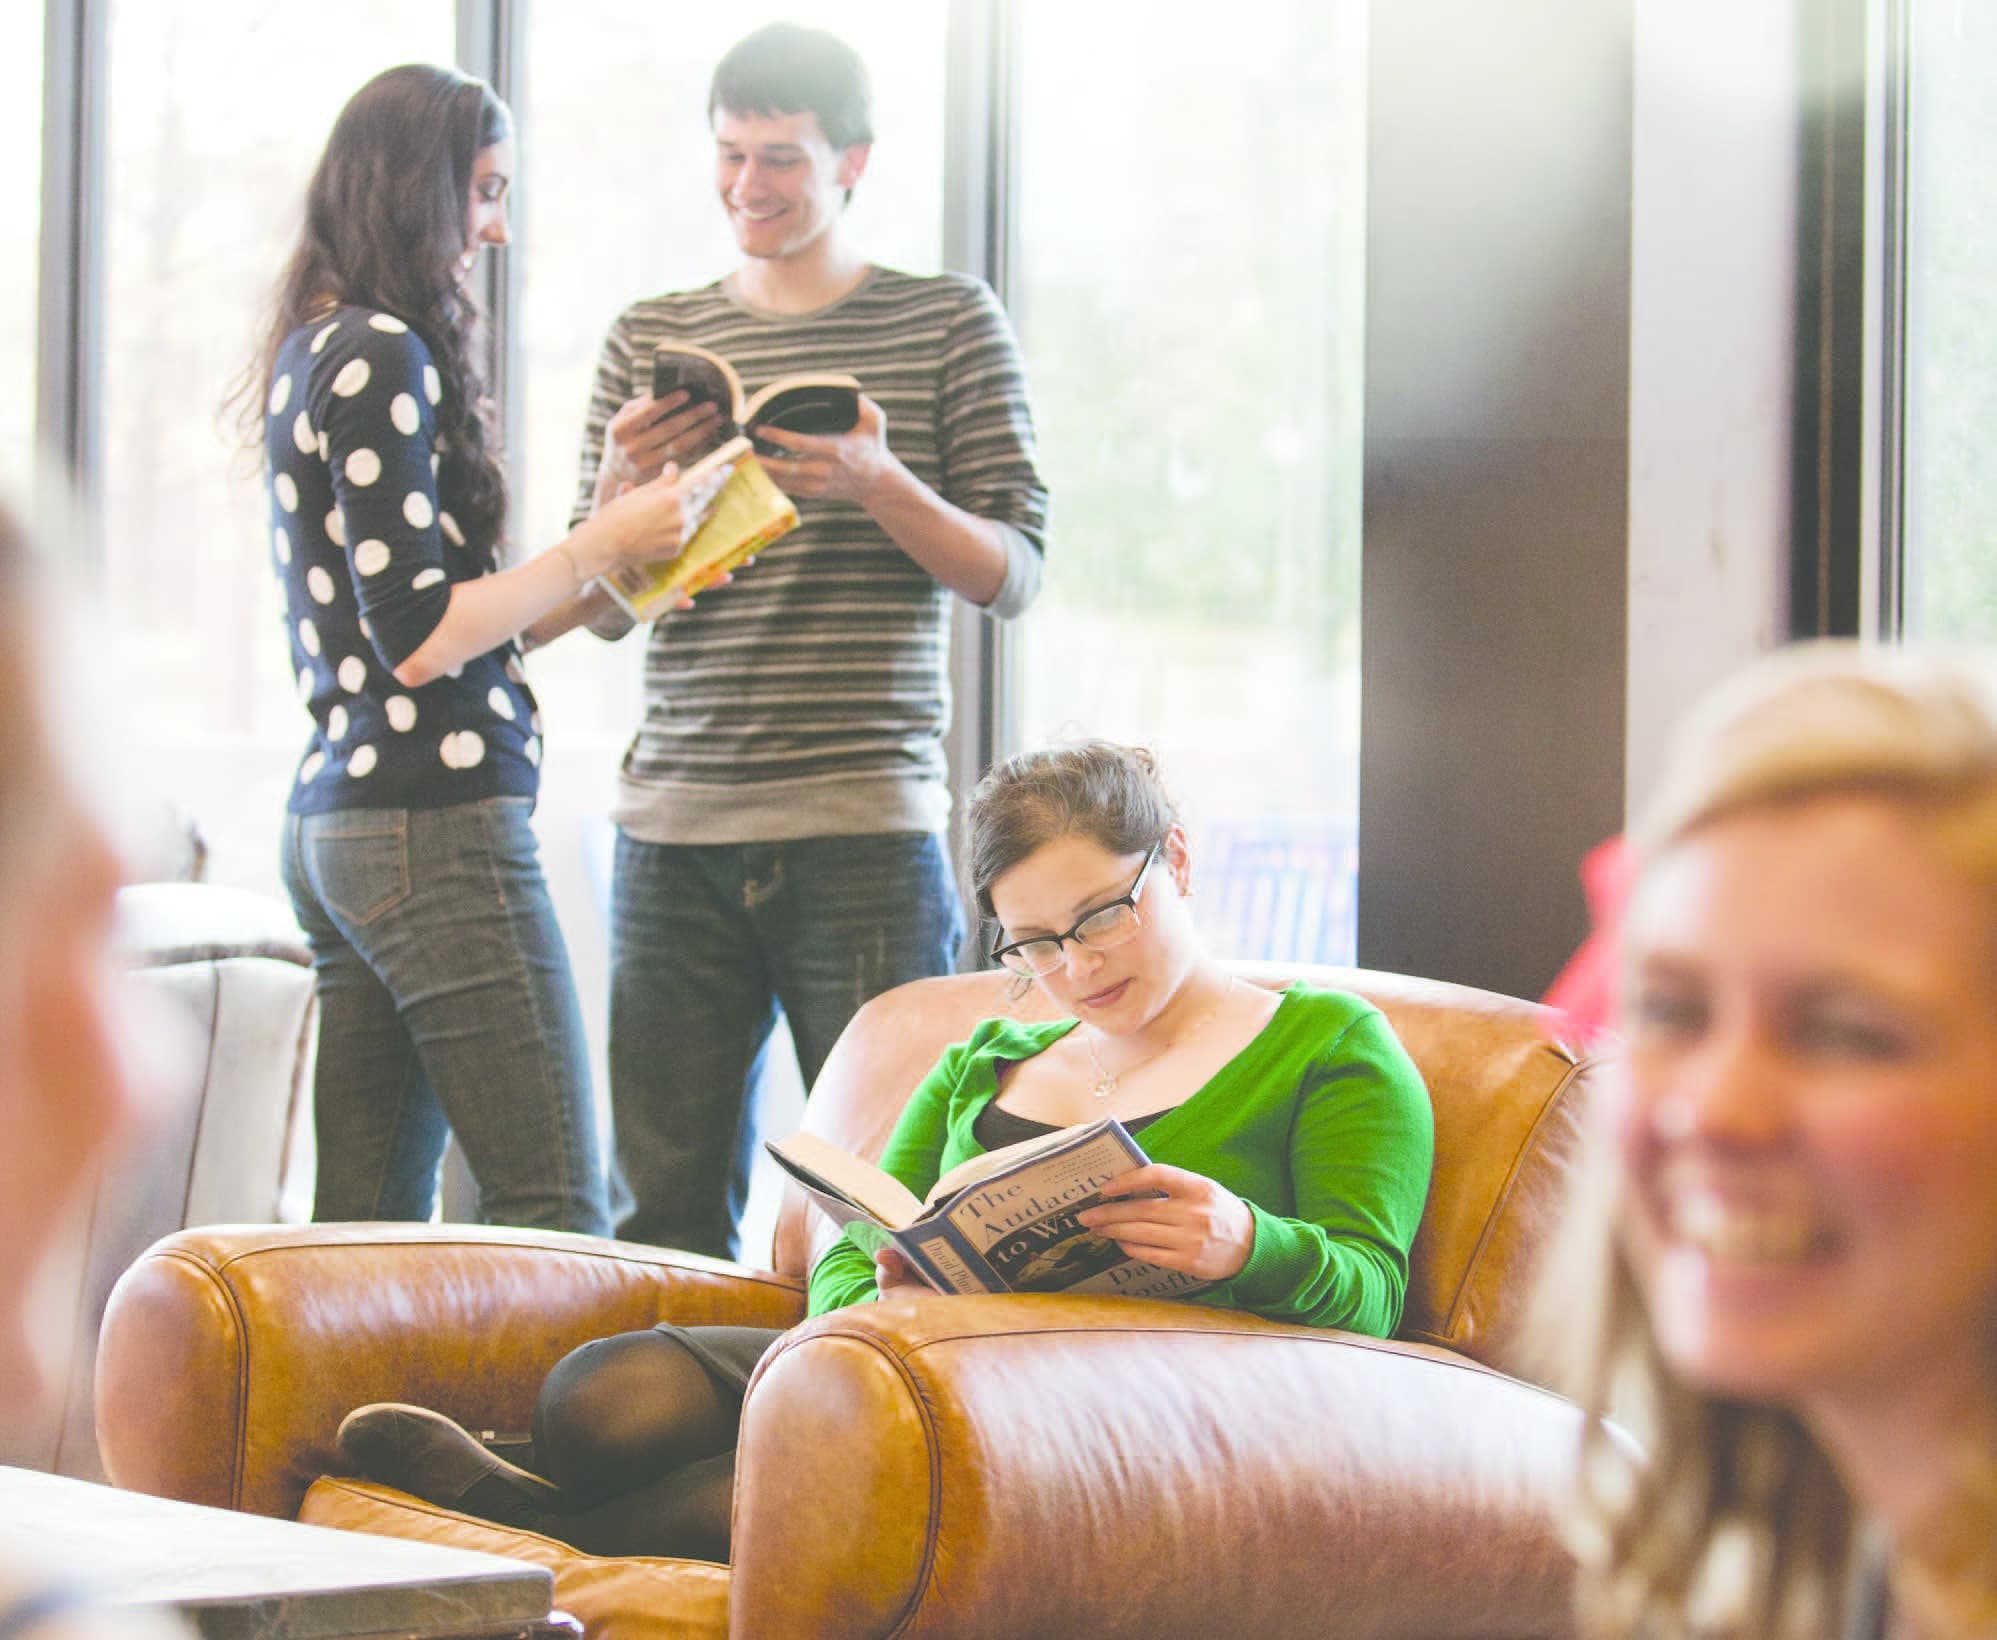 students read and talk in the library lounge